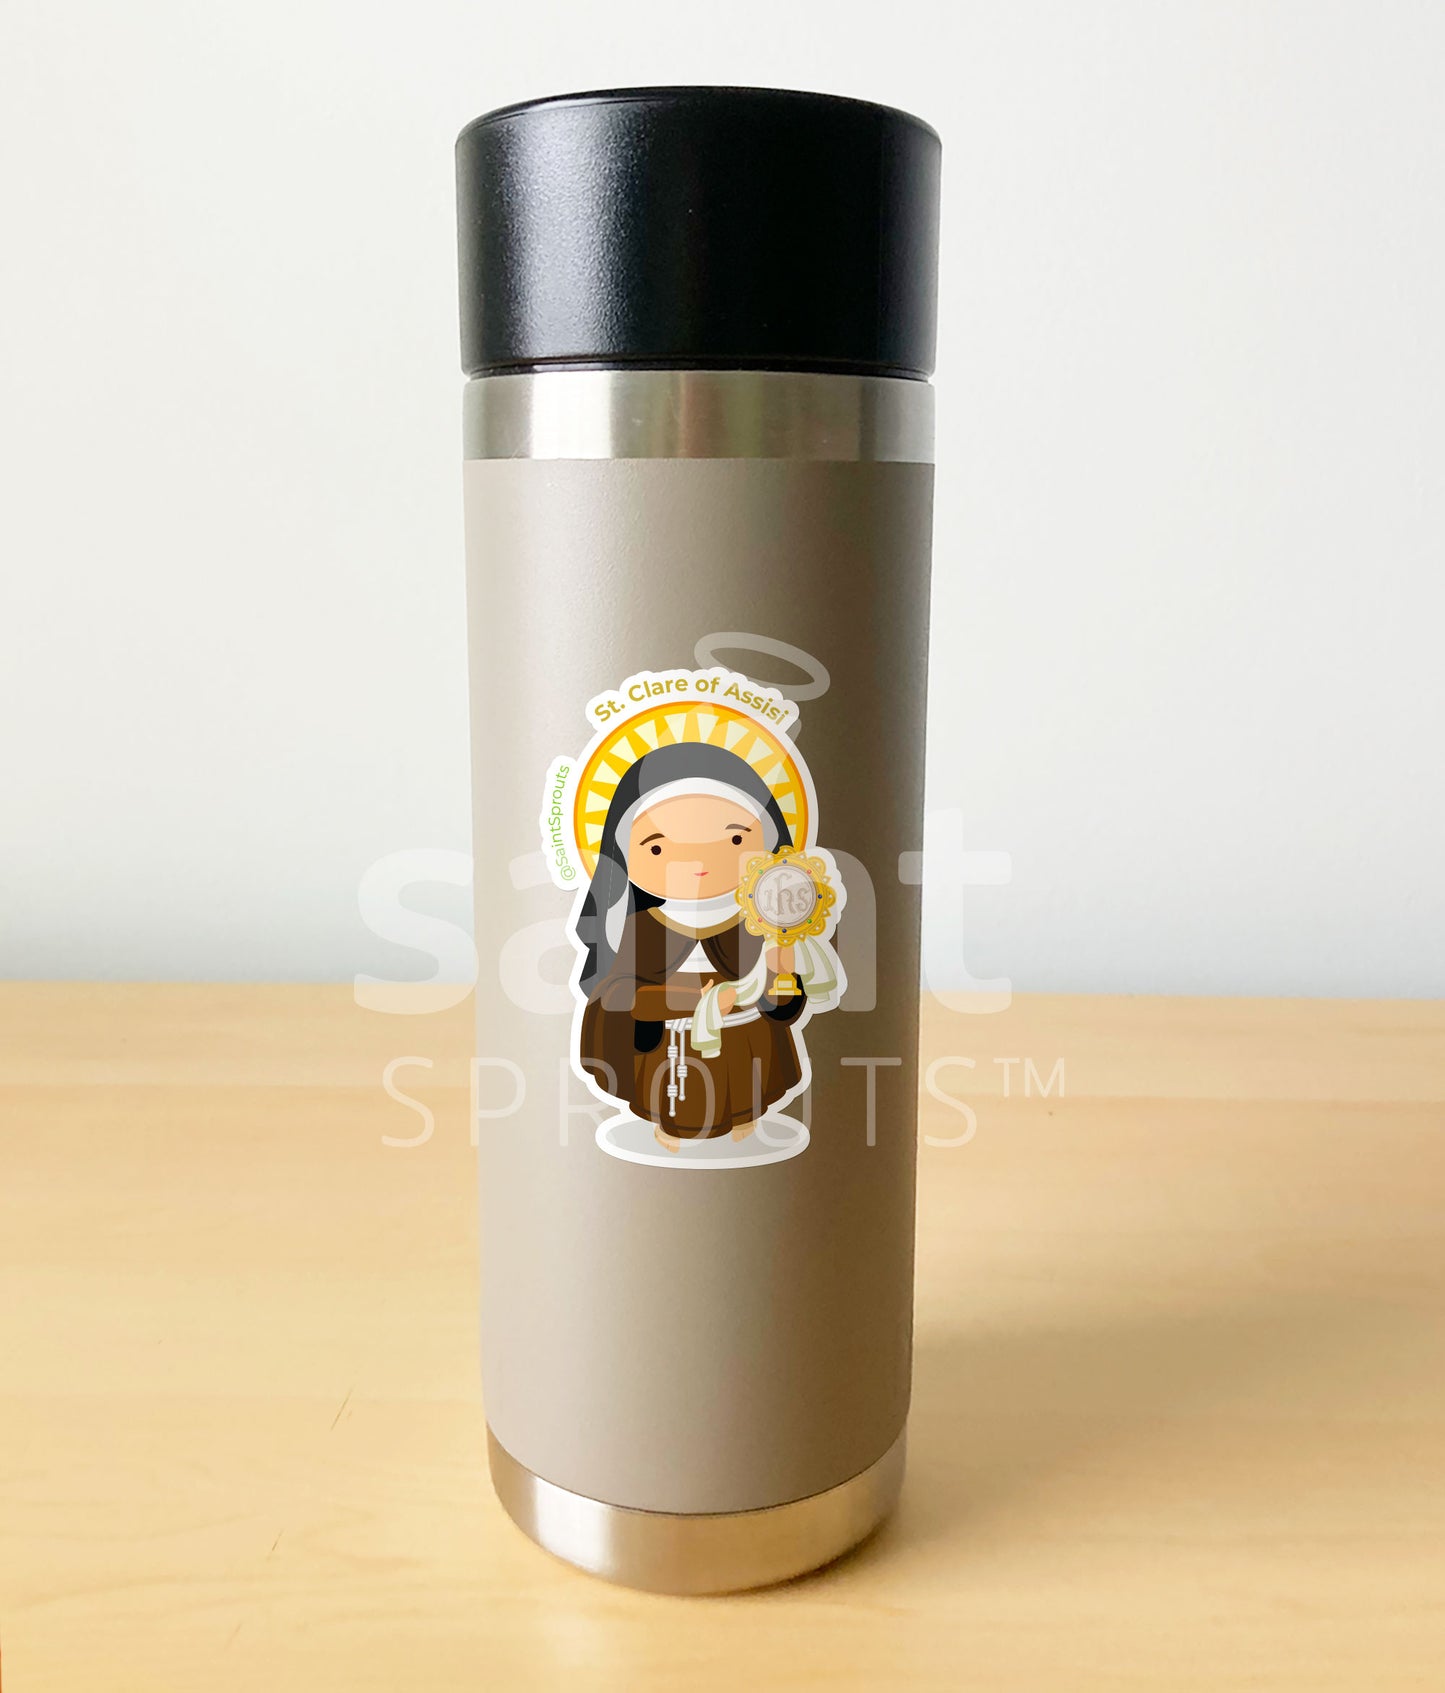 St. Clare of Assisi / St. Claire of Assisi Sticker